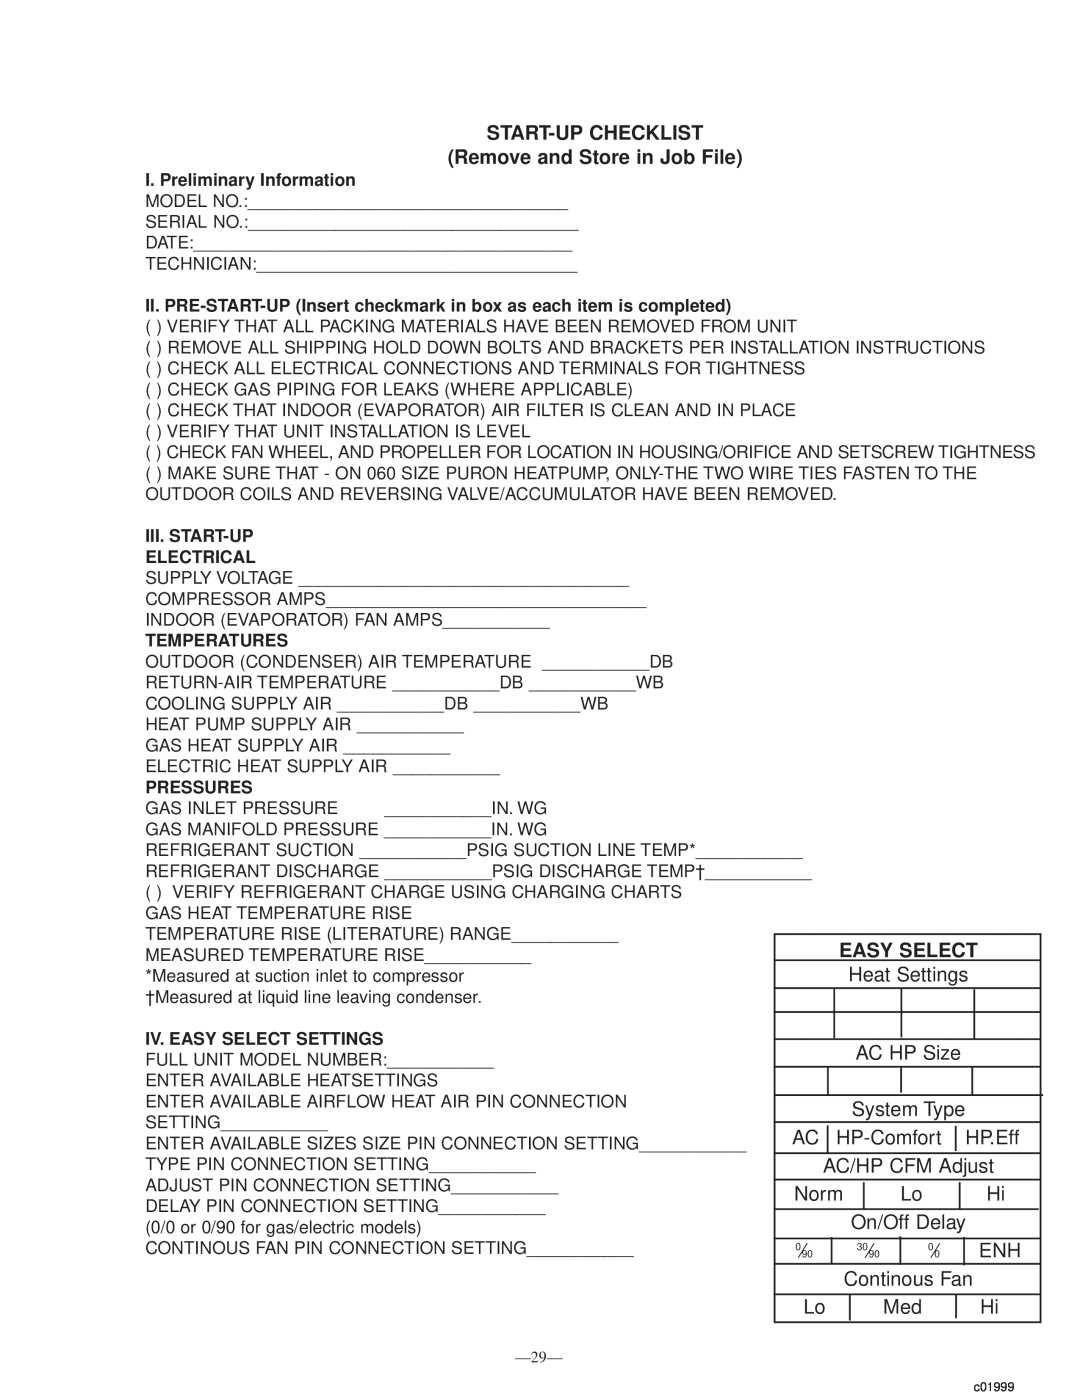 Bryant 702B, 583B START-UP CHECKLIST Remove and Store in Job File, Easy Select, I. Preliminary Information, Temperatures 